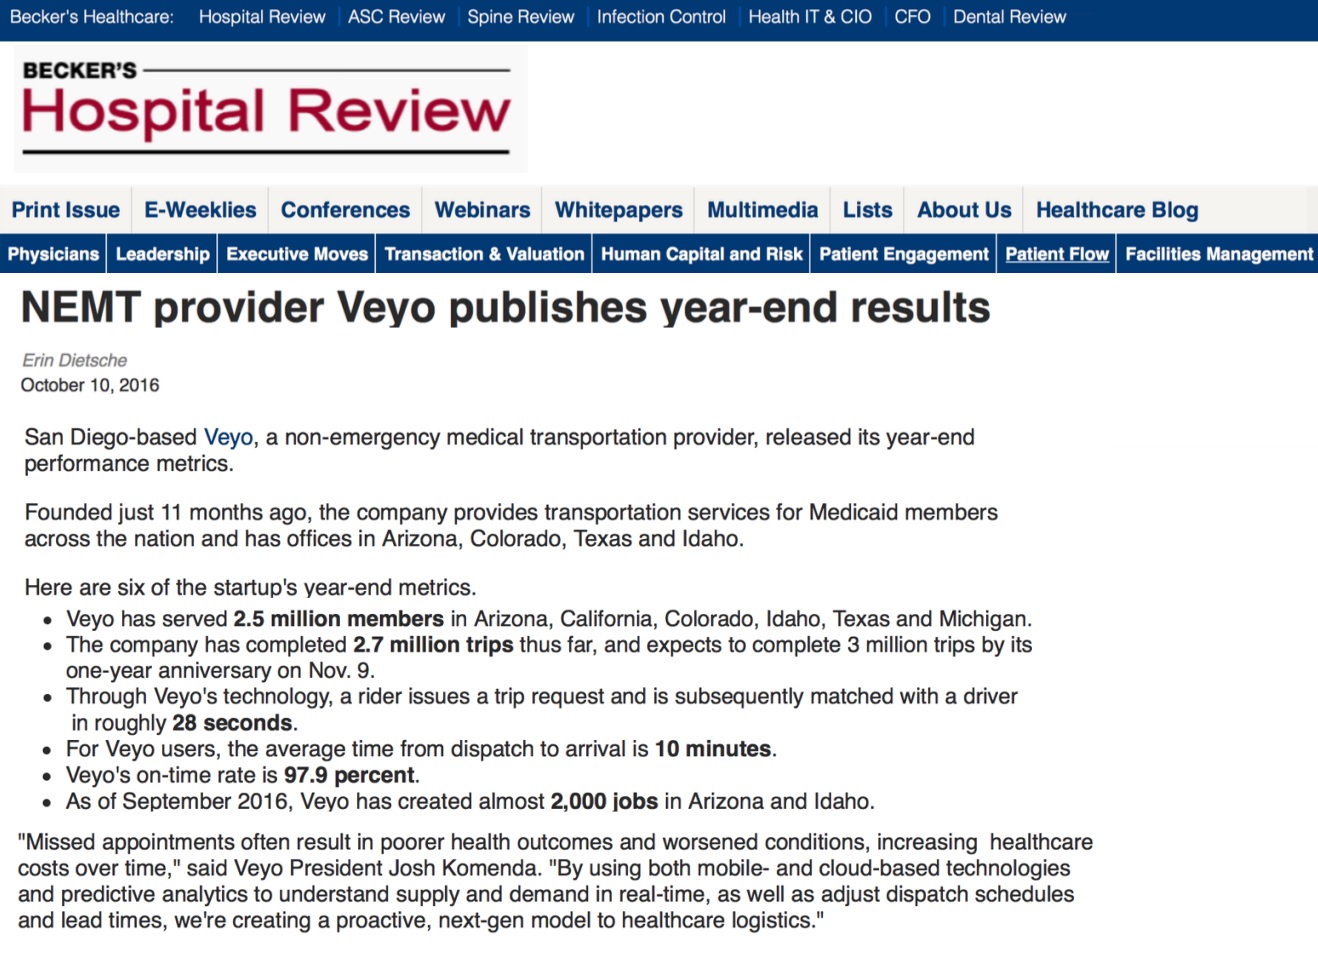 Veyo in Becker's Hospital Review